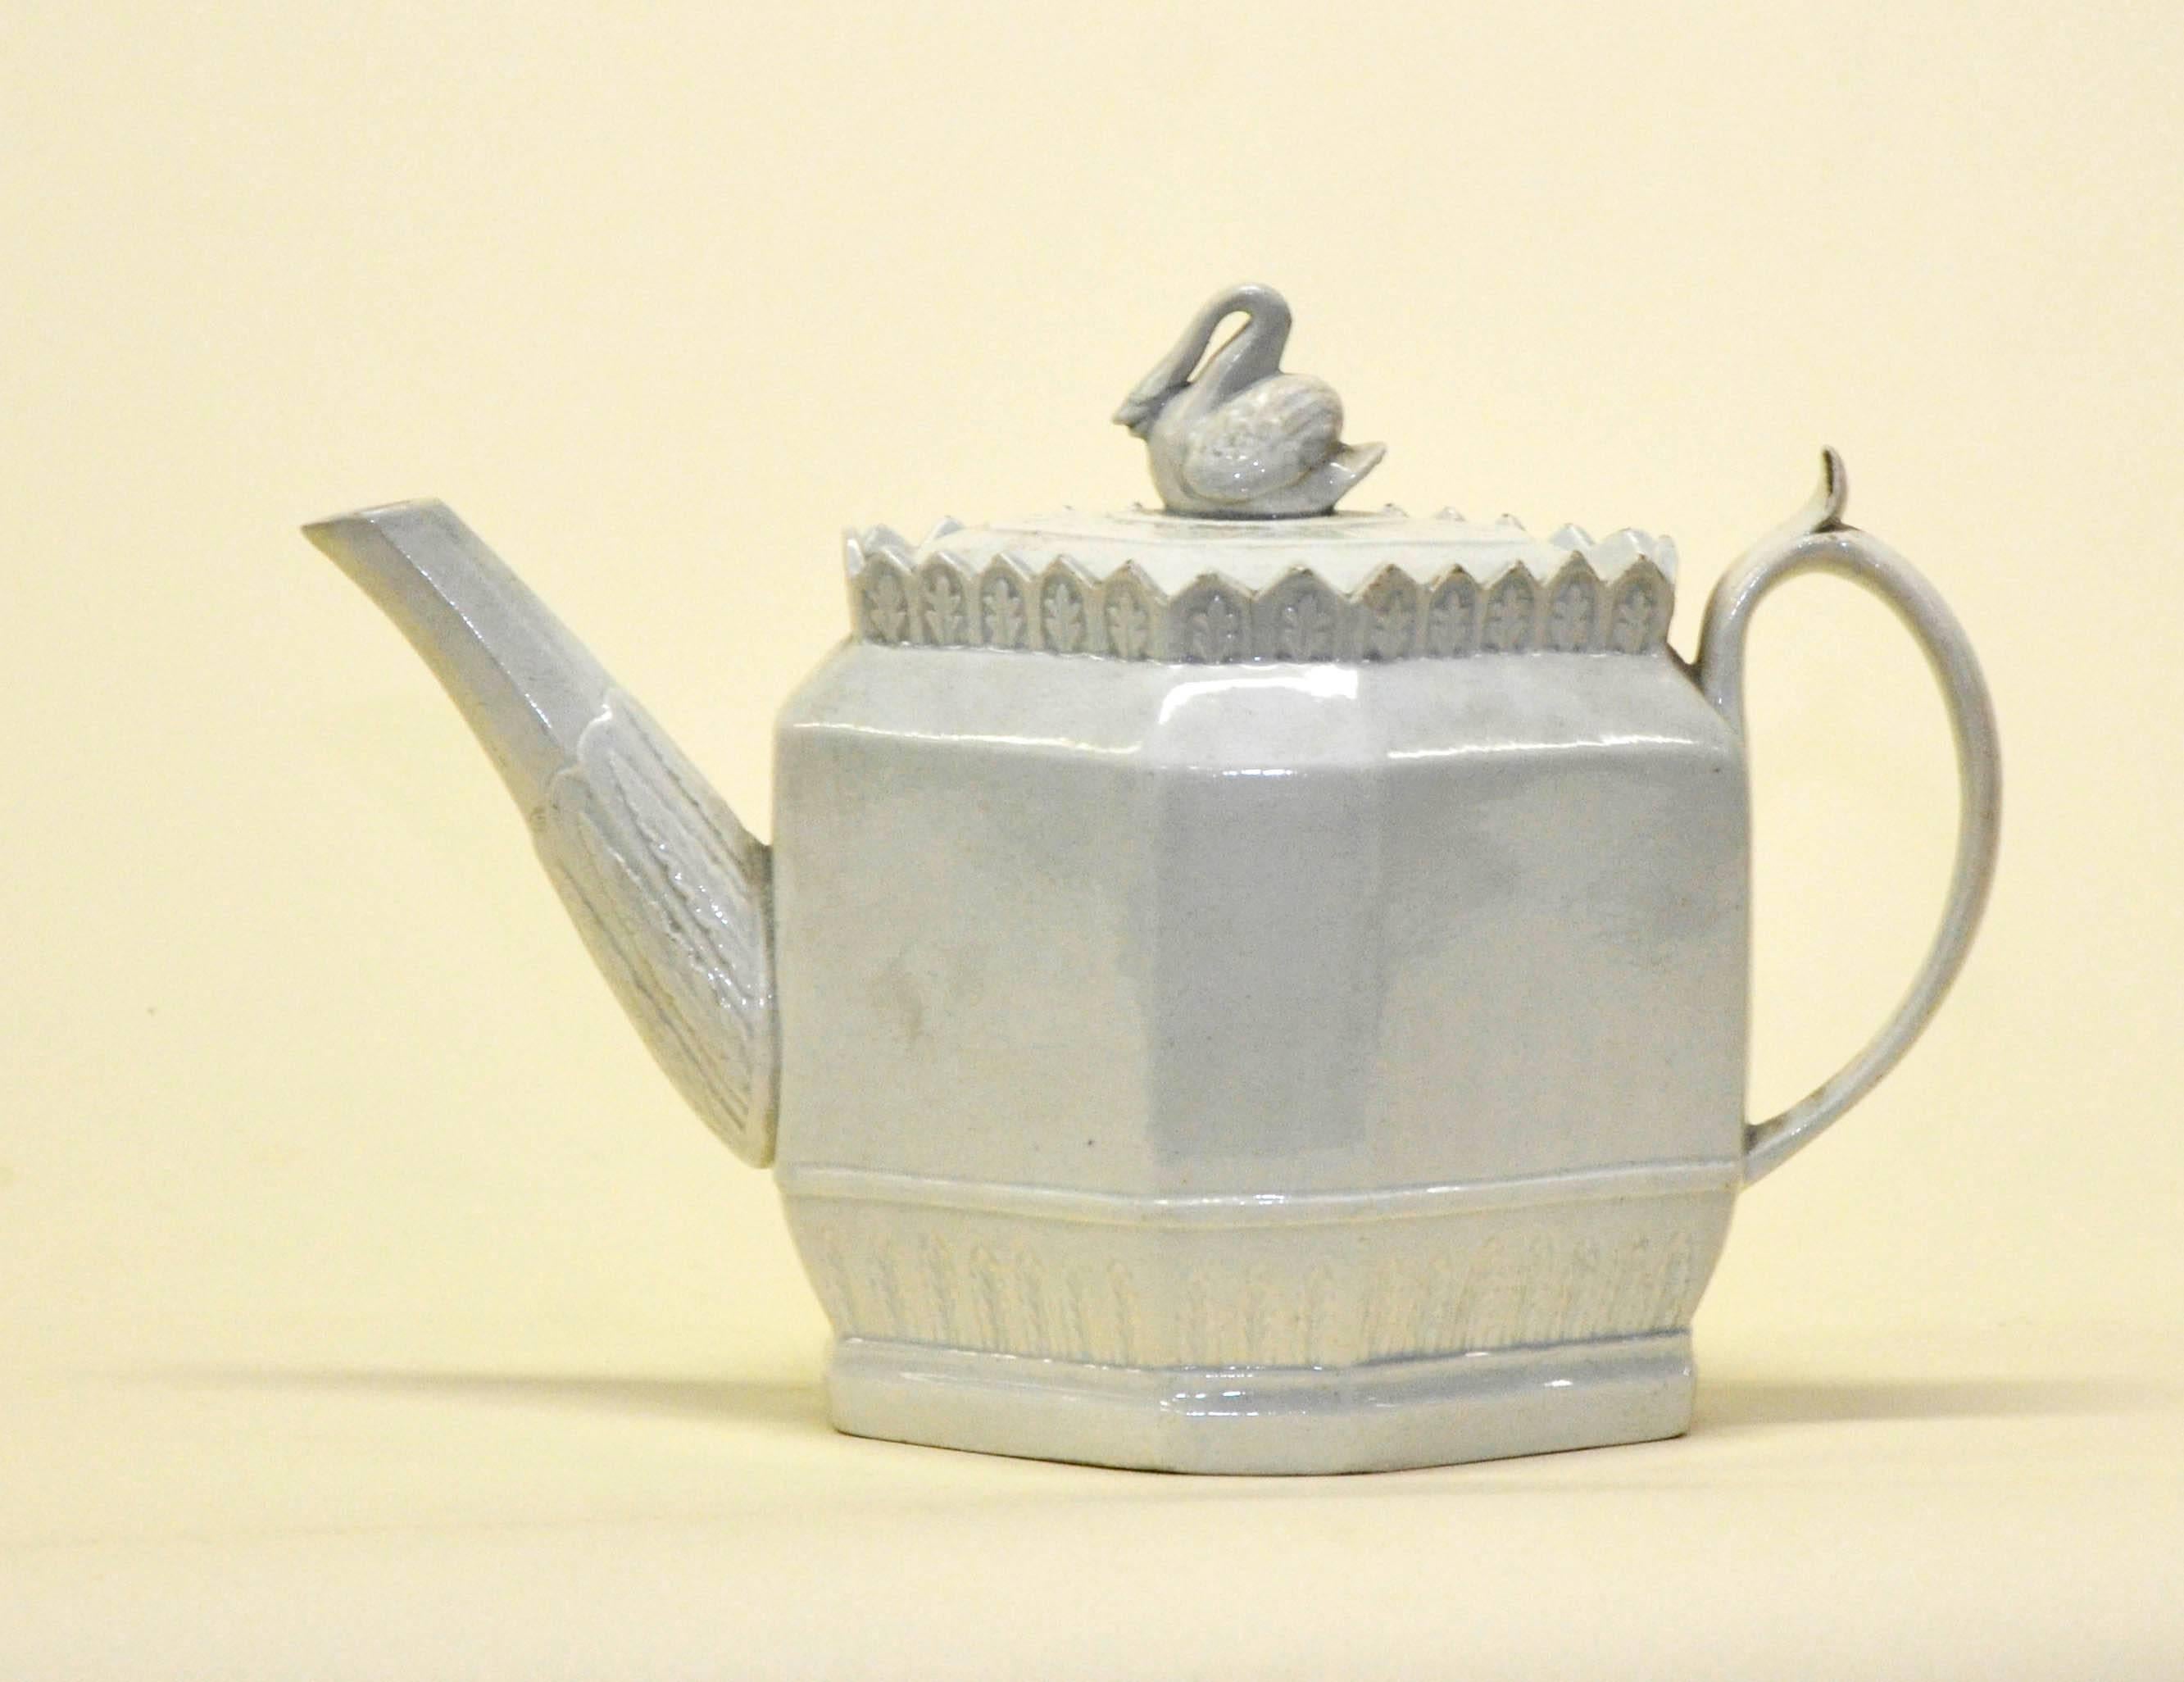 Early 1800 English Octagonal Lead-Glazed Earthenware Teapot with Swan Finial For Sale 1